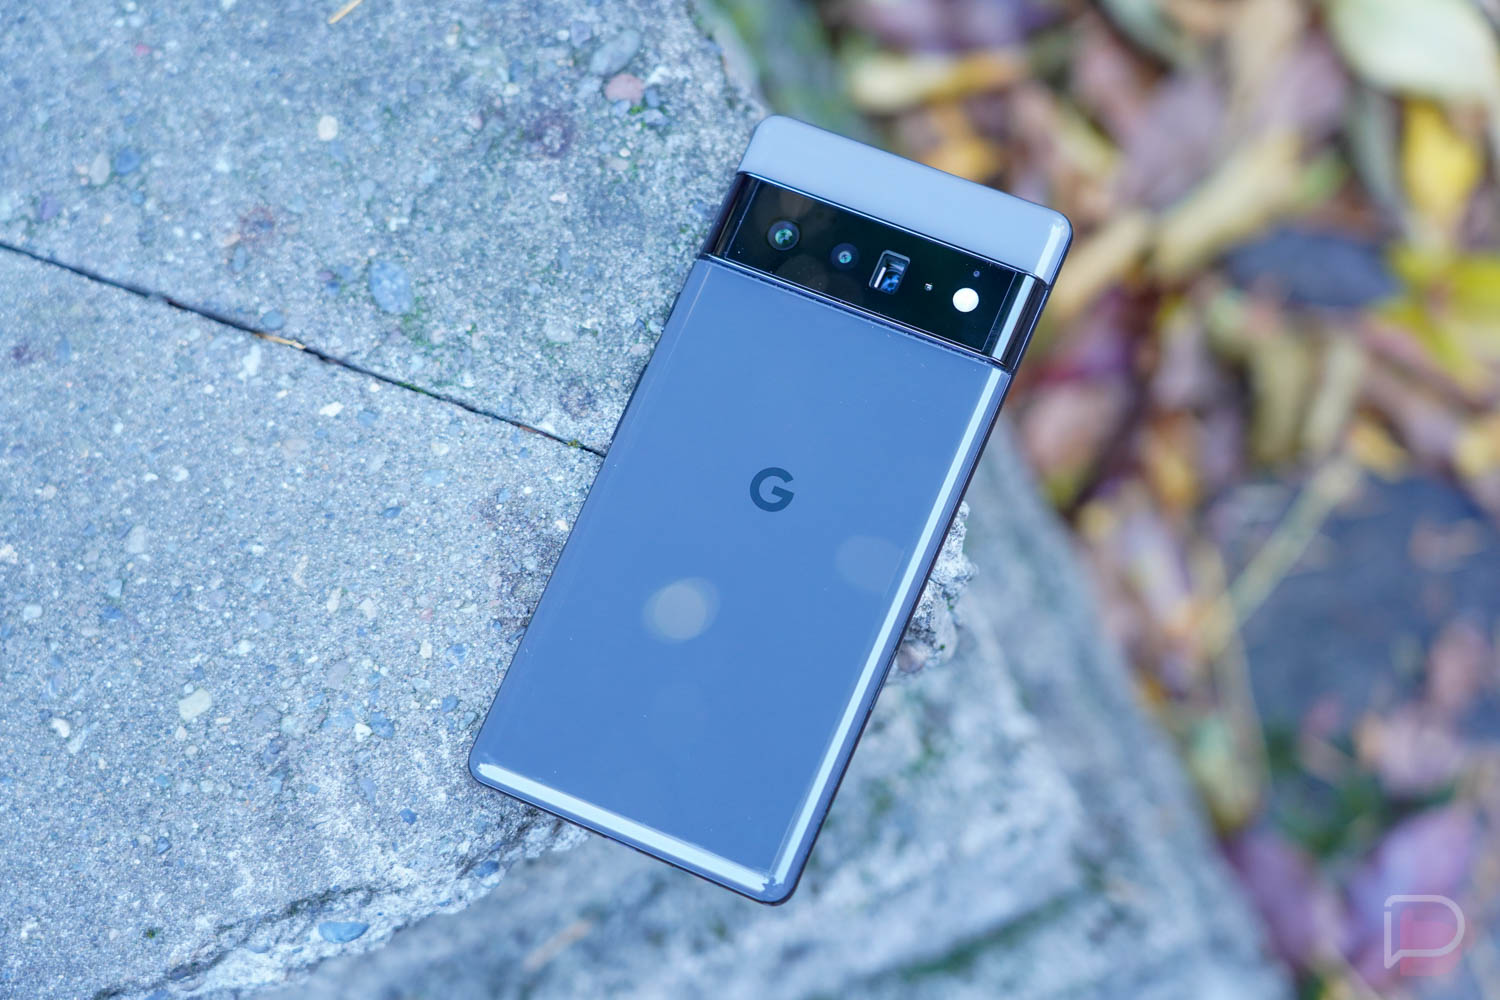 Google Pixel 6 Pro Review: Impressive Phone That May Be Too Big